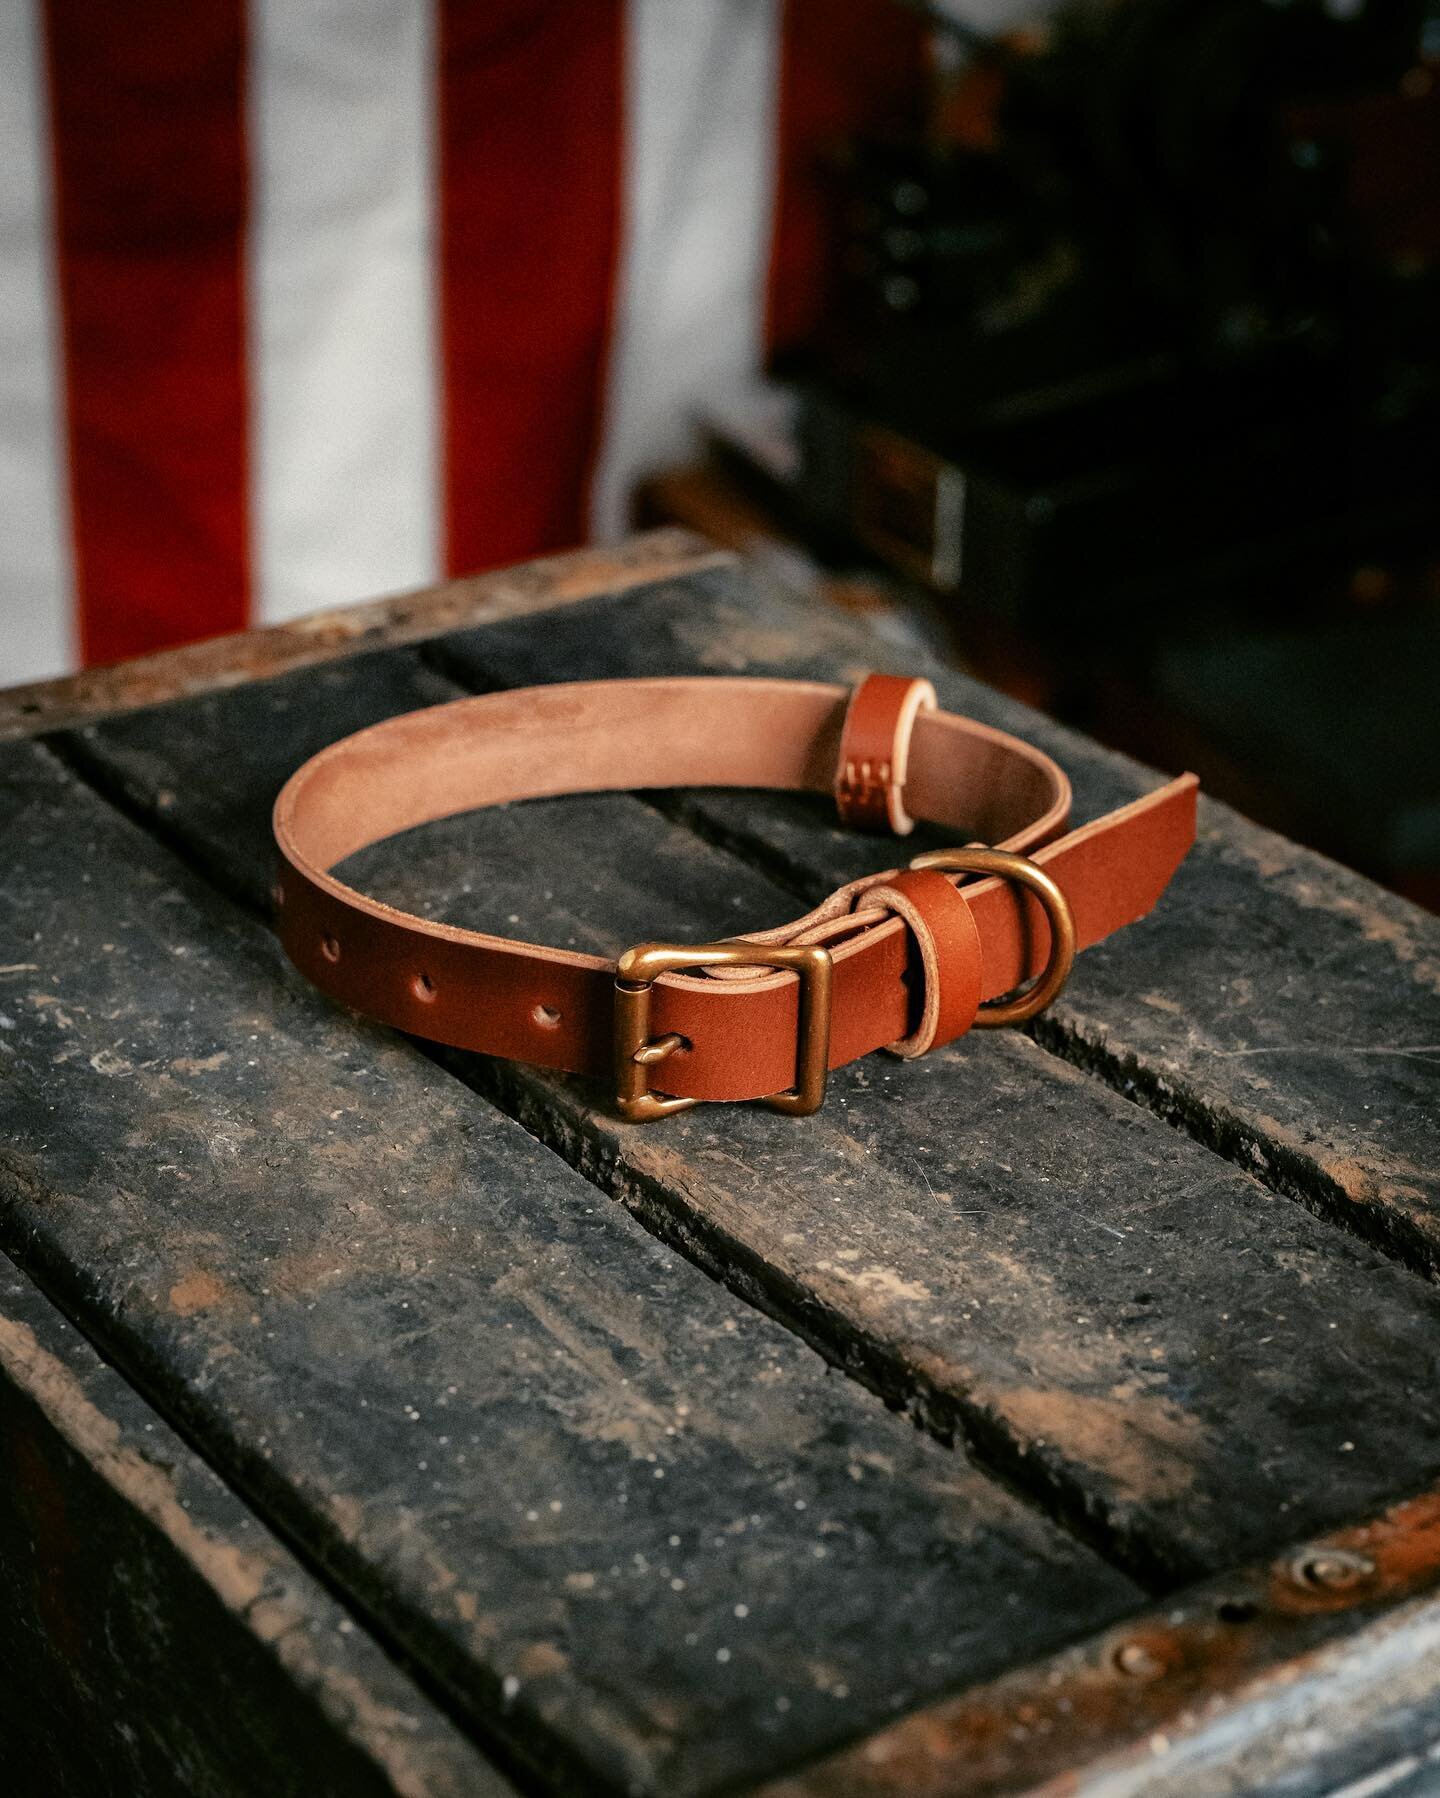 May the 4th be with you! Heritage is tomorrow! Here is another new product hitting the shop! 

The Heritage dog collar.

#Leathercrafting #handmade #handmadeleather #leather #leatherwallet #edc #edcwallet #fieldnotes #leathergoods #leatheraccessories